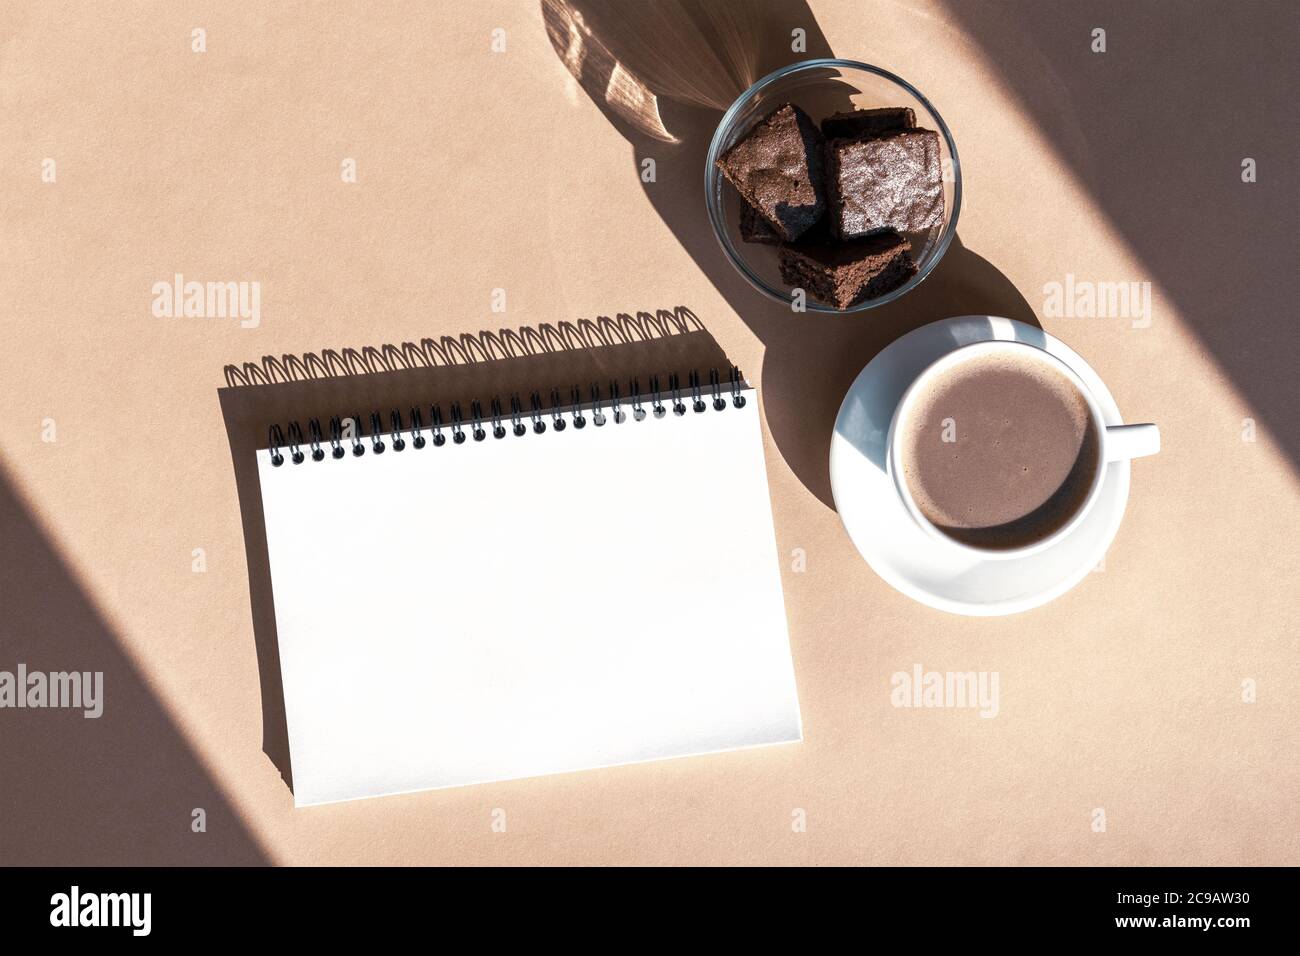 Notepad, coffee cup and chocolate cake. Cosy workplace, work at home concept. Sharp shadows, top view, flat lay, copy space Stock Photo